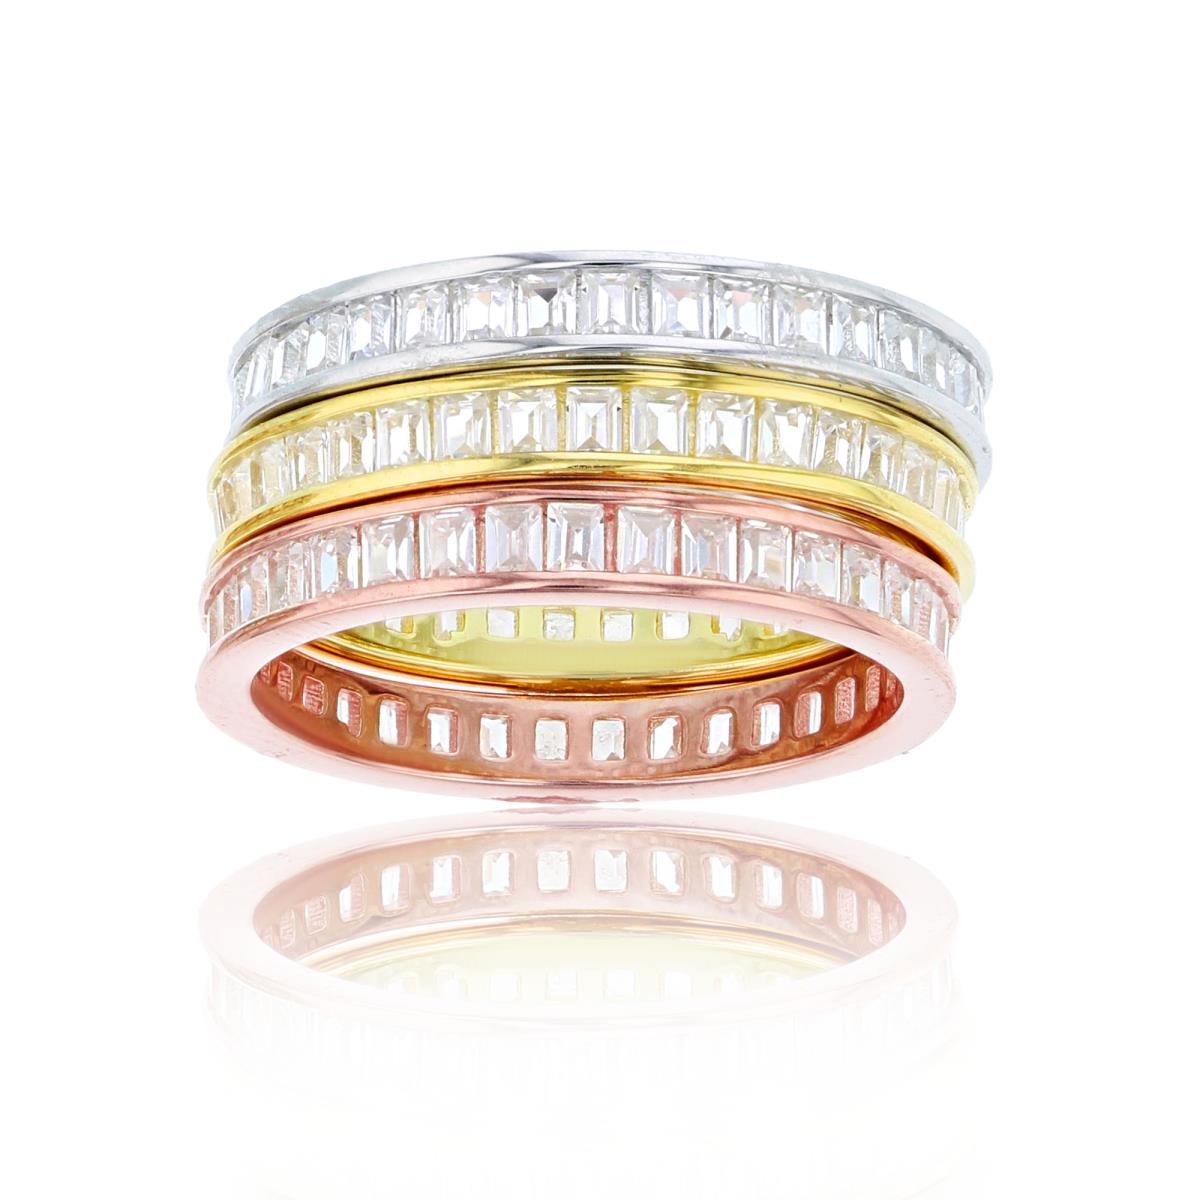 Sterling Silver Tricolor 1-Micron Baguette Channel Set Stack Ring